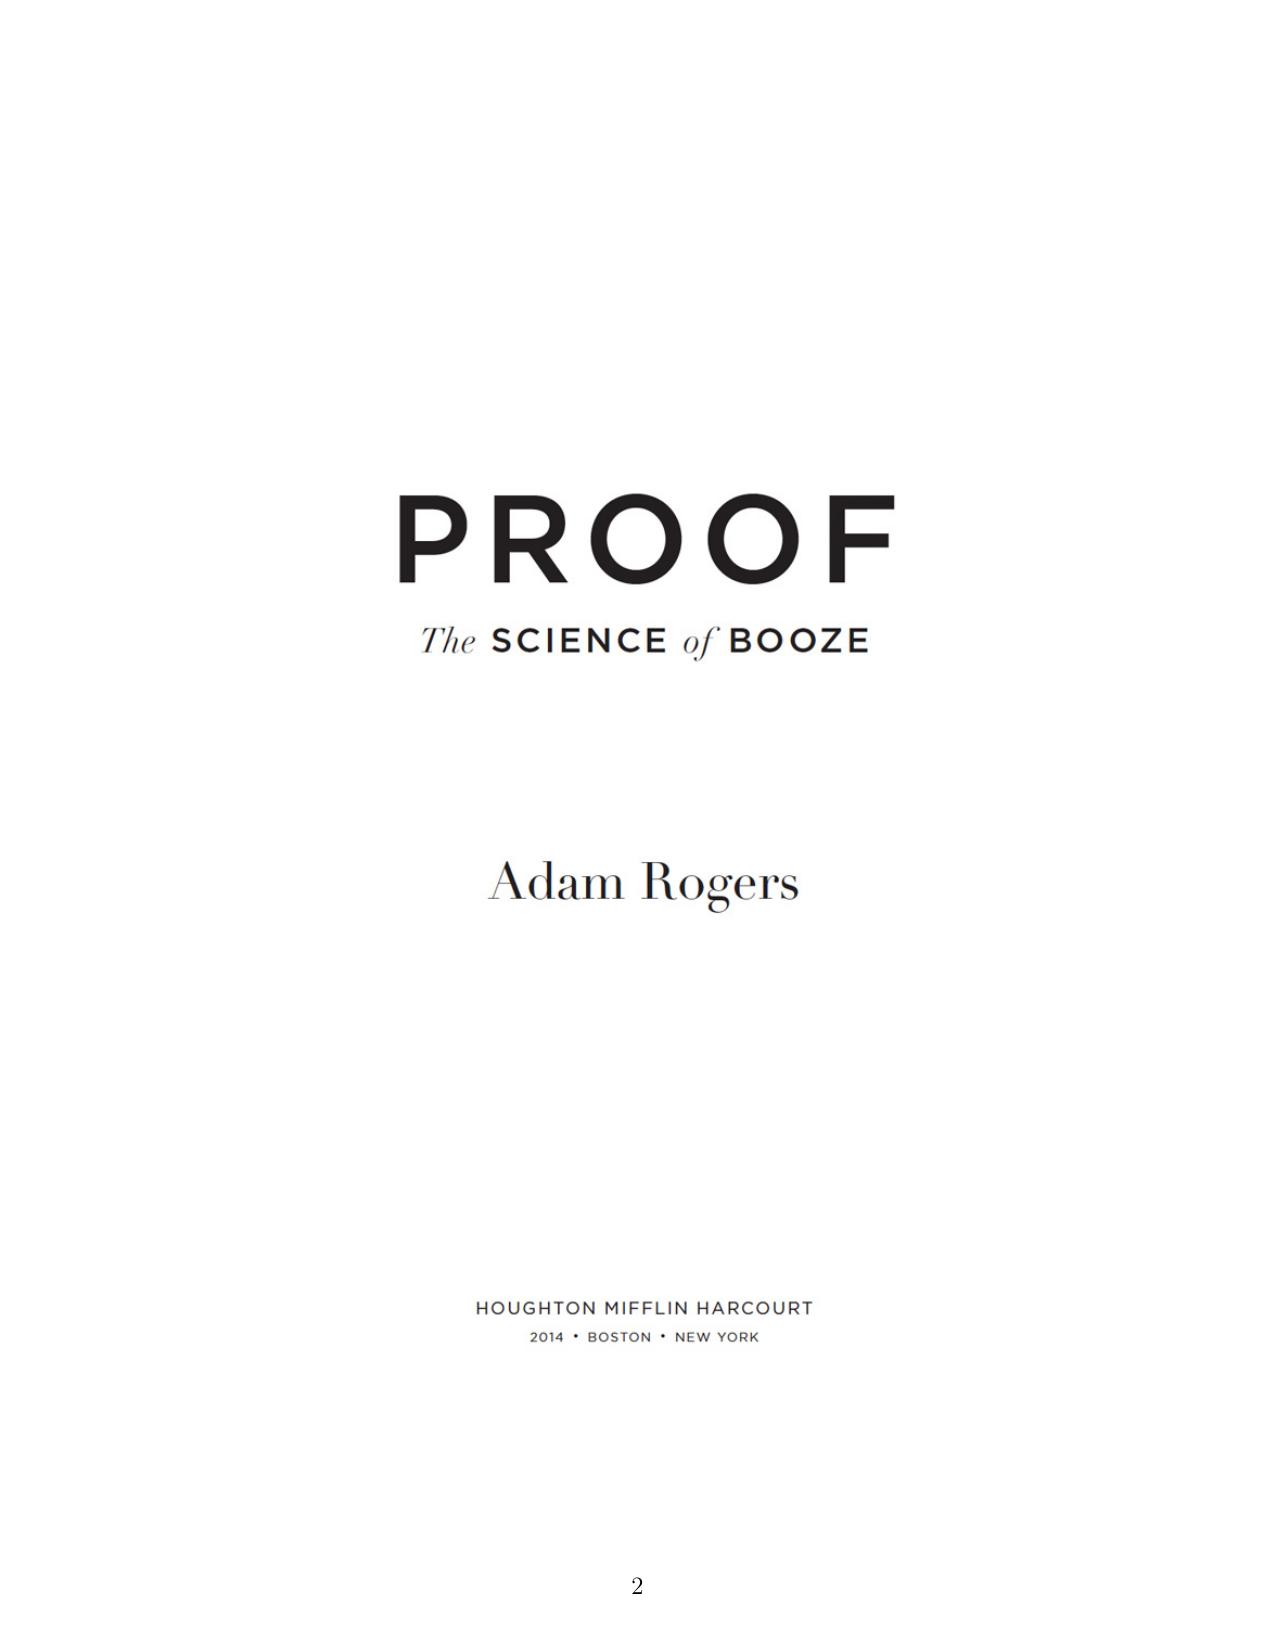 Proof: The Science of Booze by Adam Rogers